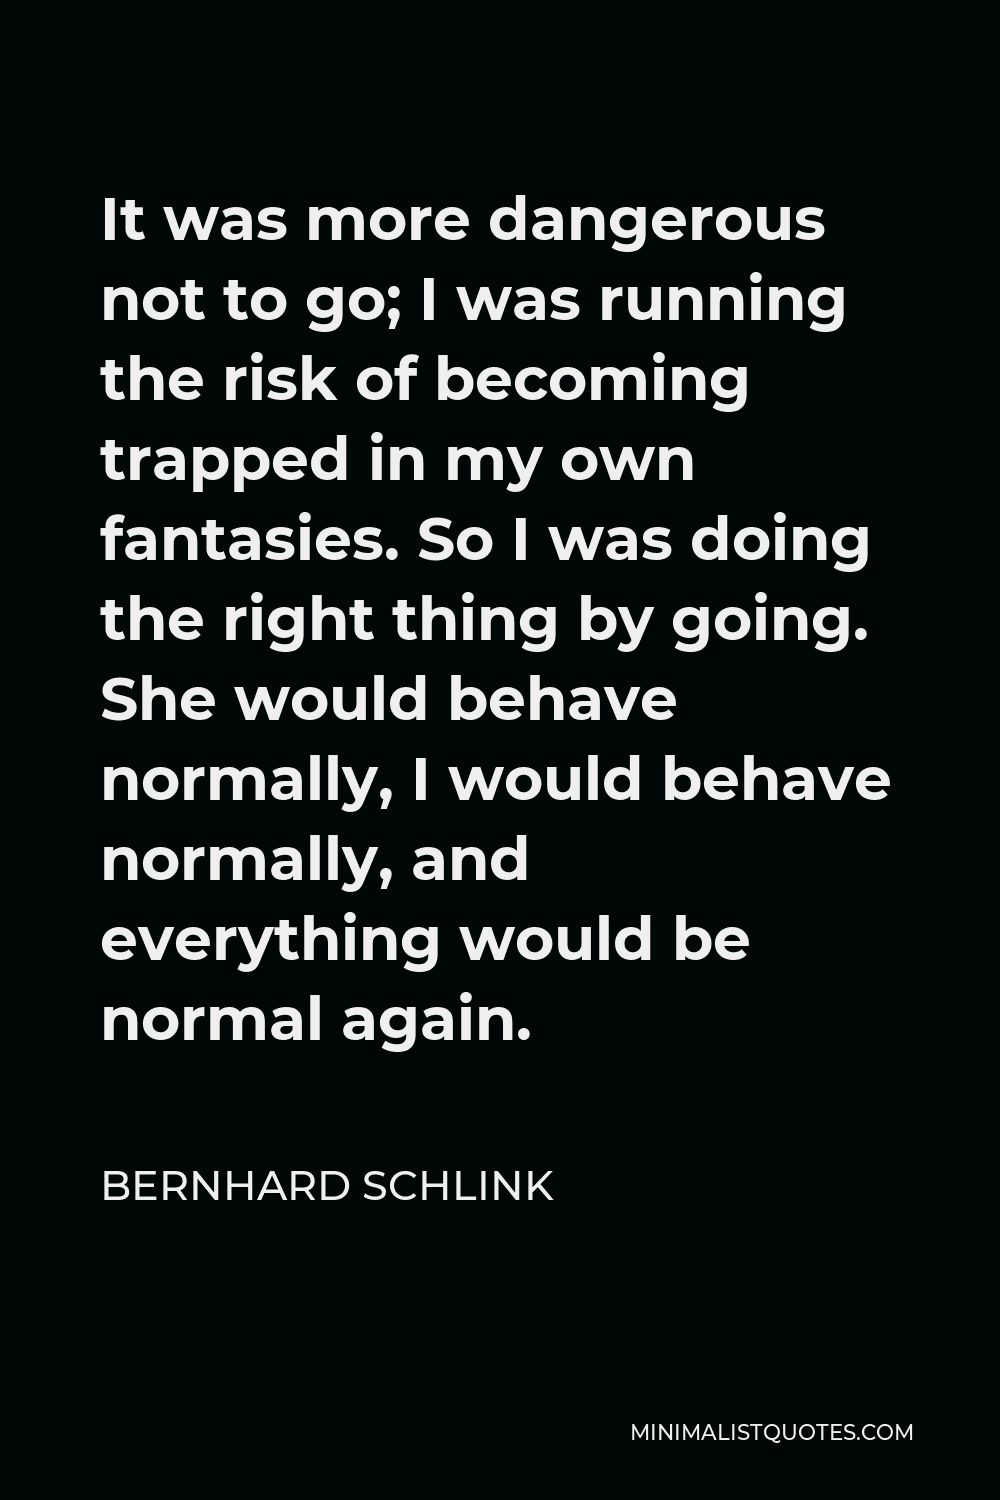 Bernhard Schlink Quote - It was more dangerous not to go; I was running the risk of becoming trapped in my own fantasies. So I was doing the right thing by going. She would behave normally, I would behave normally, and everything would be normal again.